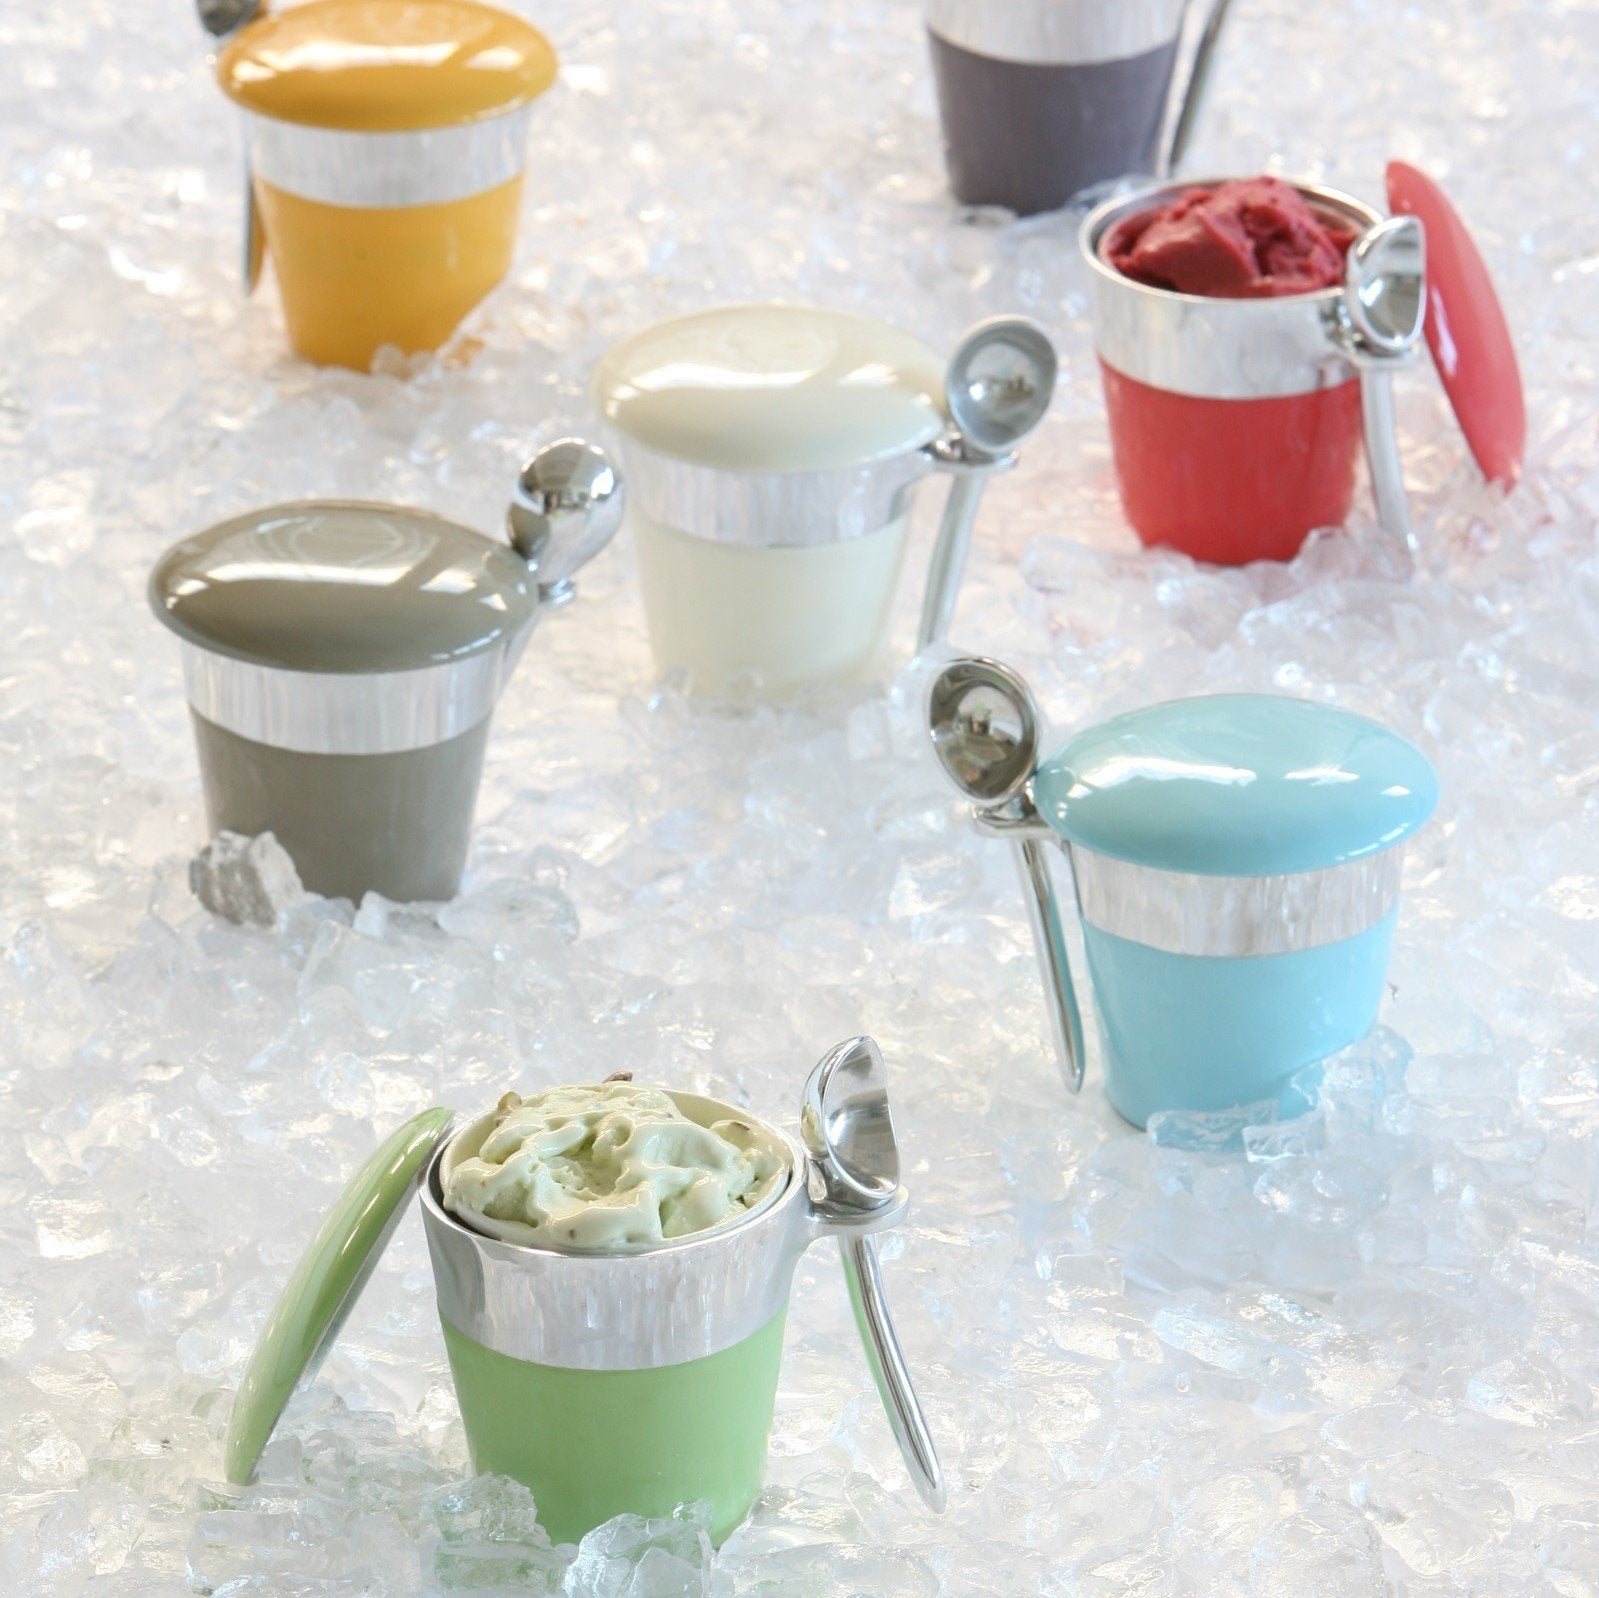 Lit Handlers Ice Cream Holder - Love A Nurse Design - Tear-Resistant &  Leak-Proof Insulated Pint Cooler with Handle & Spoon Pocket -  Machine-Washable